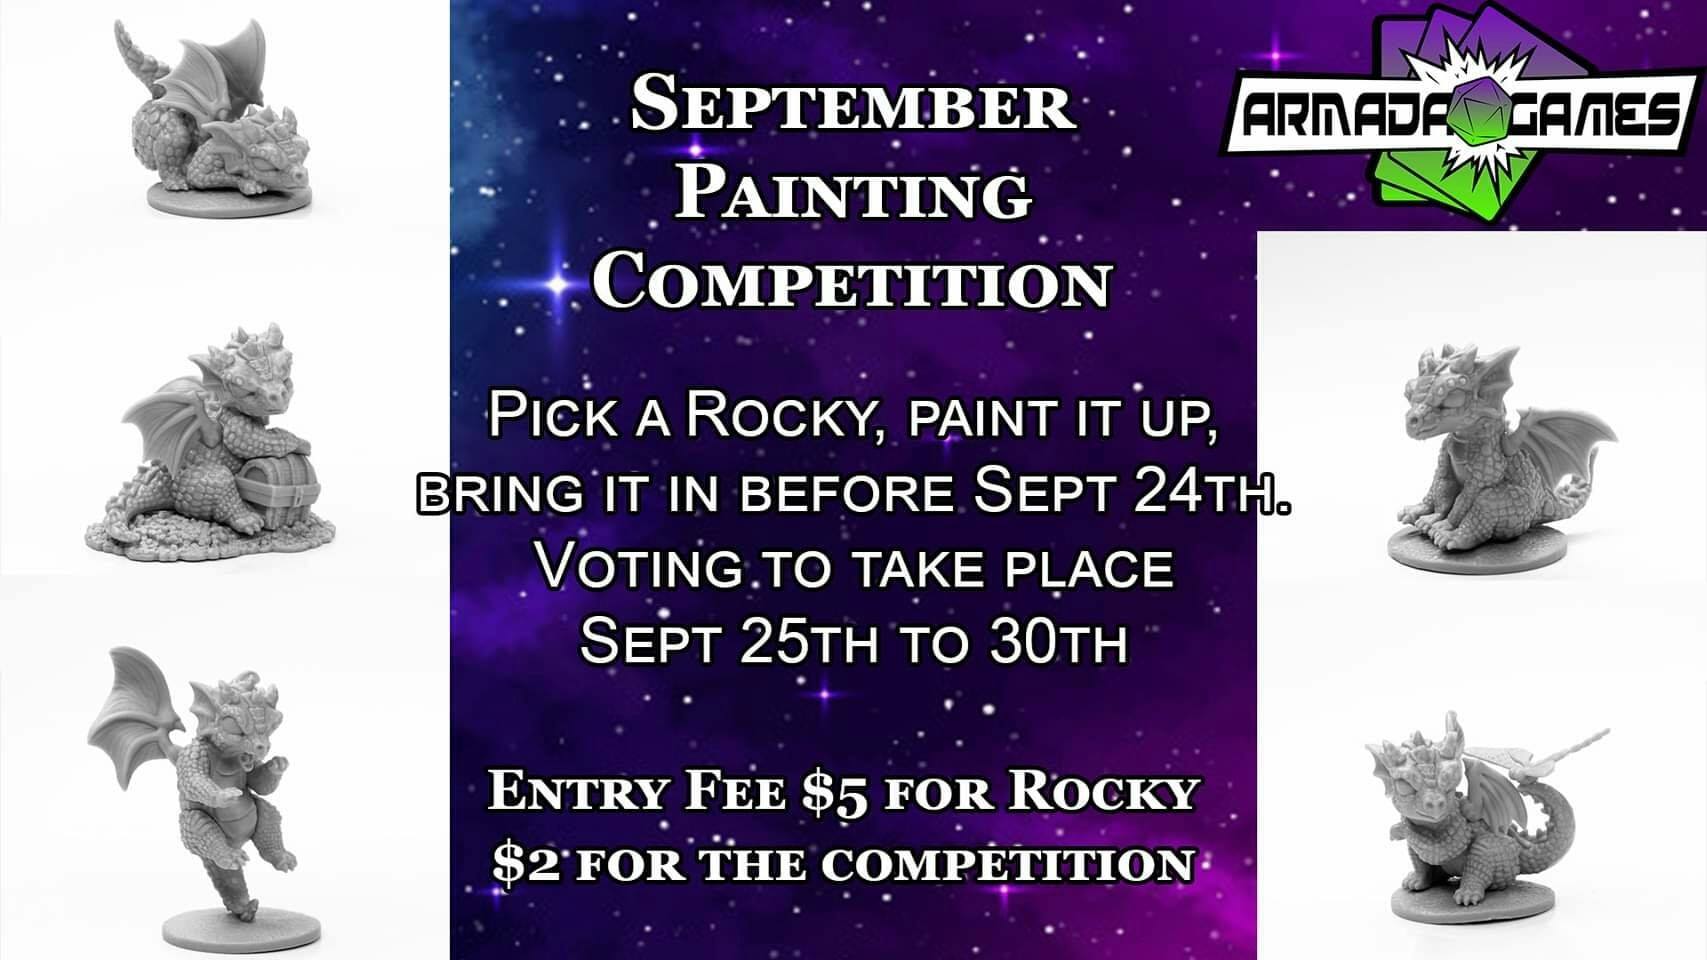 September Painting Competition - Rocky!